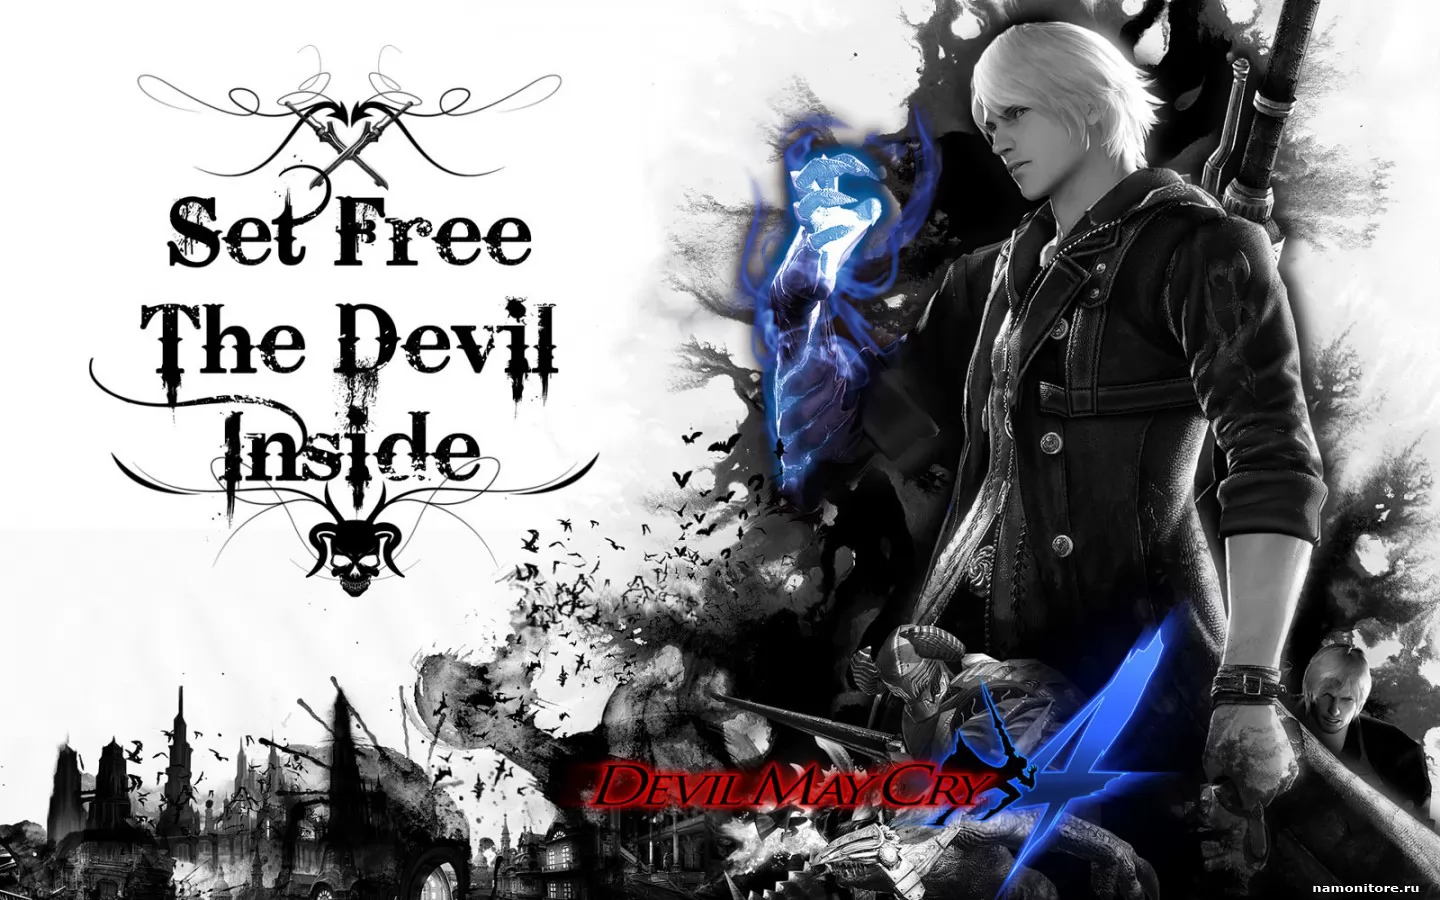 Devil May Cry 4, , ,  